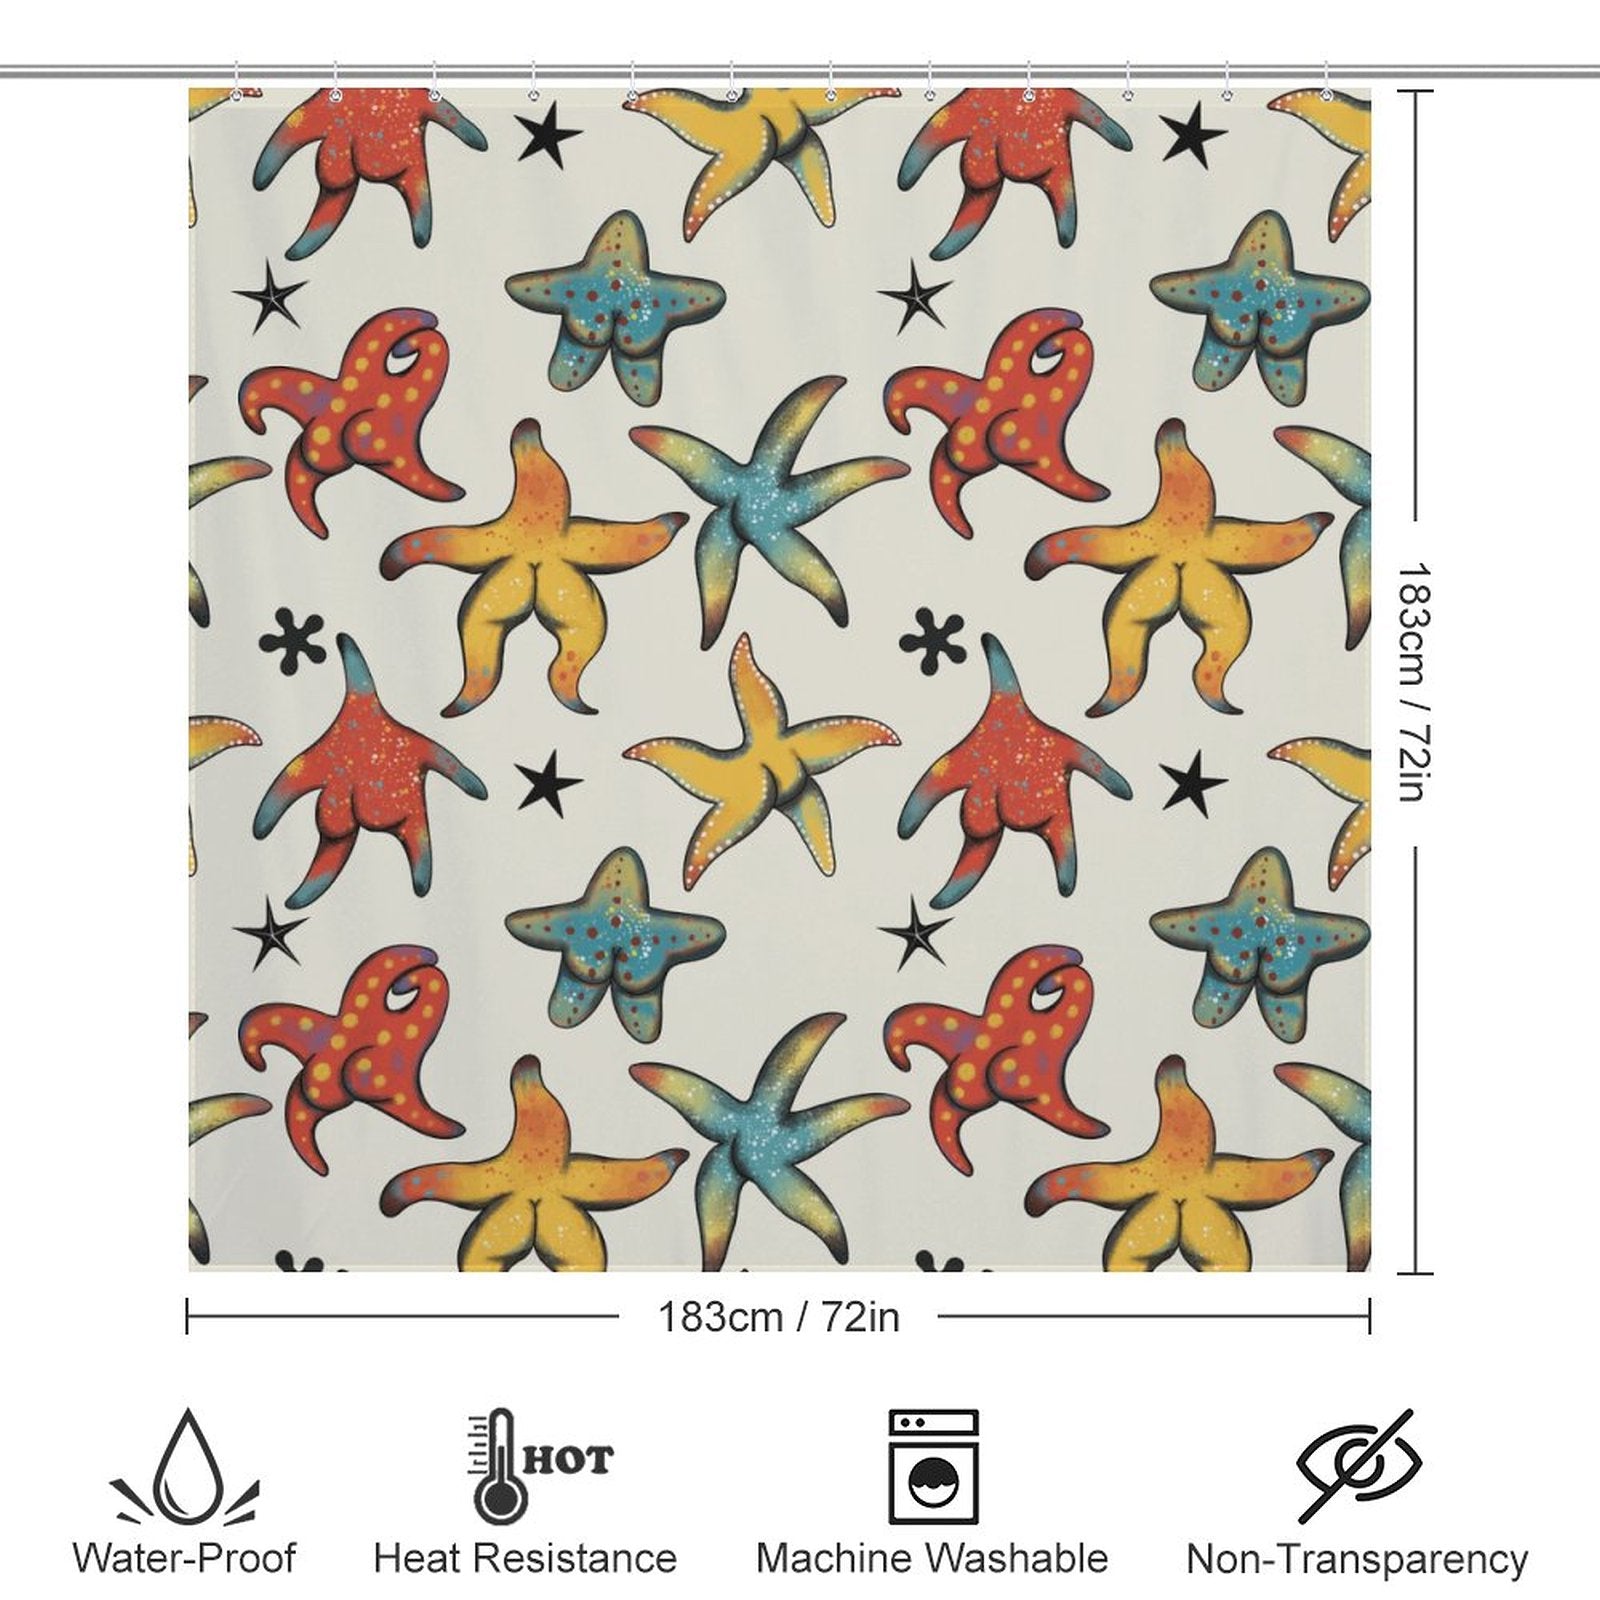 An image of a Unique Funny Starfish Butt Shower Curtain-Cottoncat by Cotton Cat.